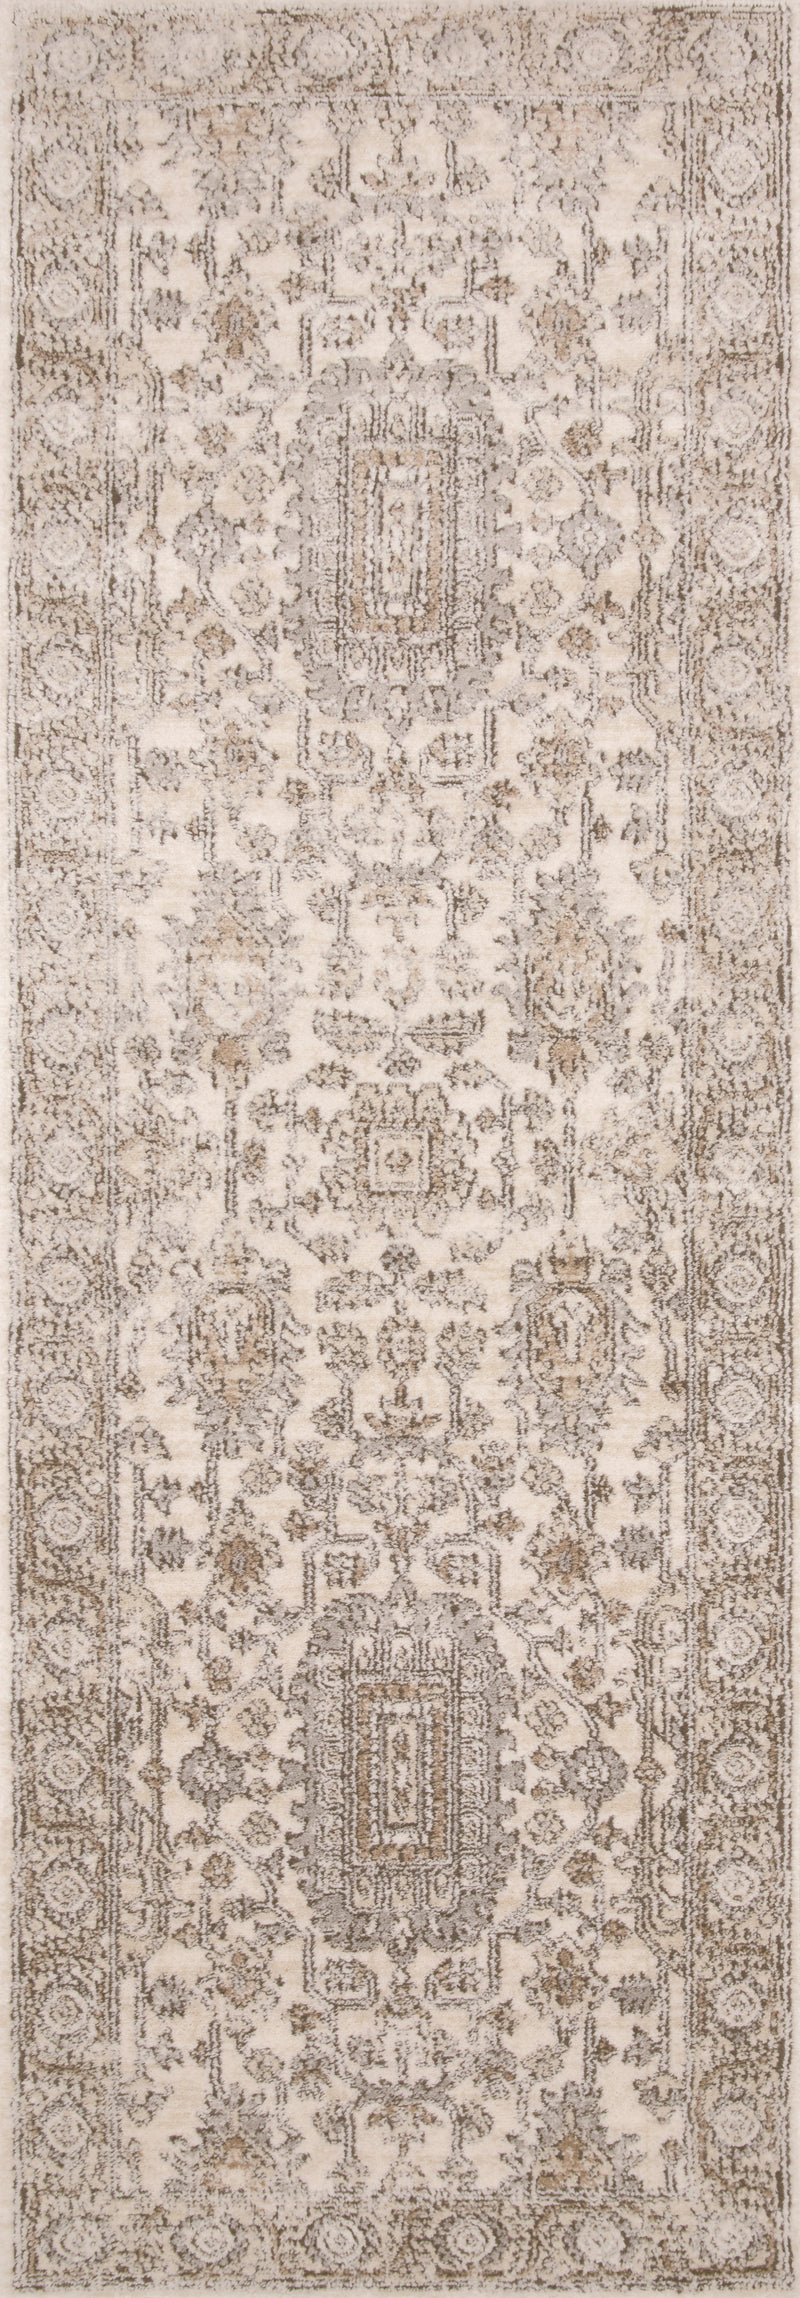 media image for Teagan Rug in Ivory / Sand by Loloi II 279